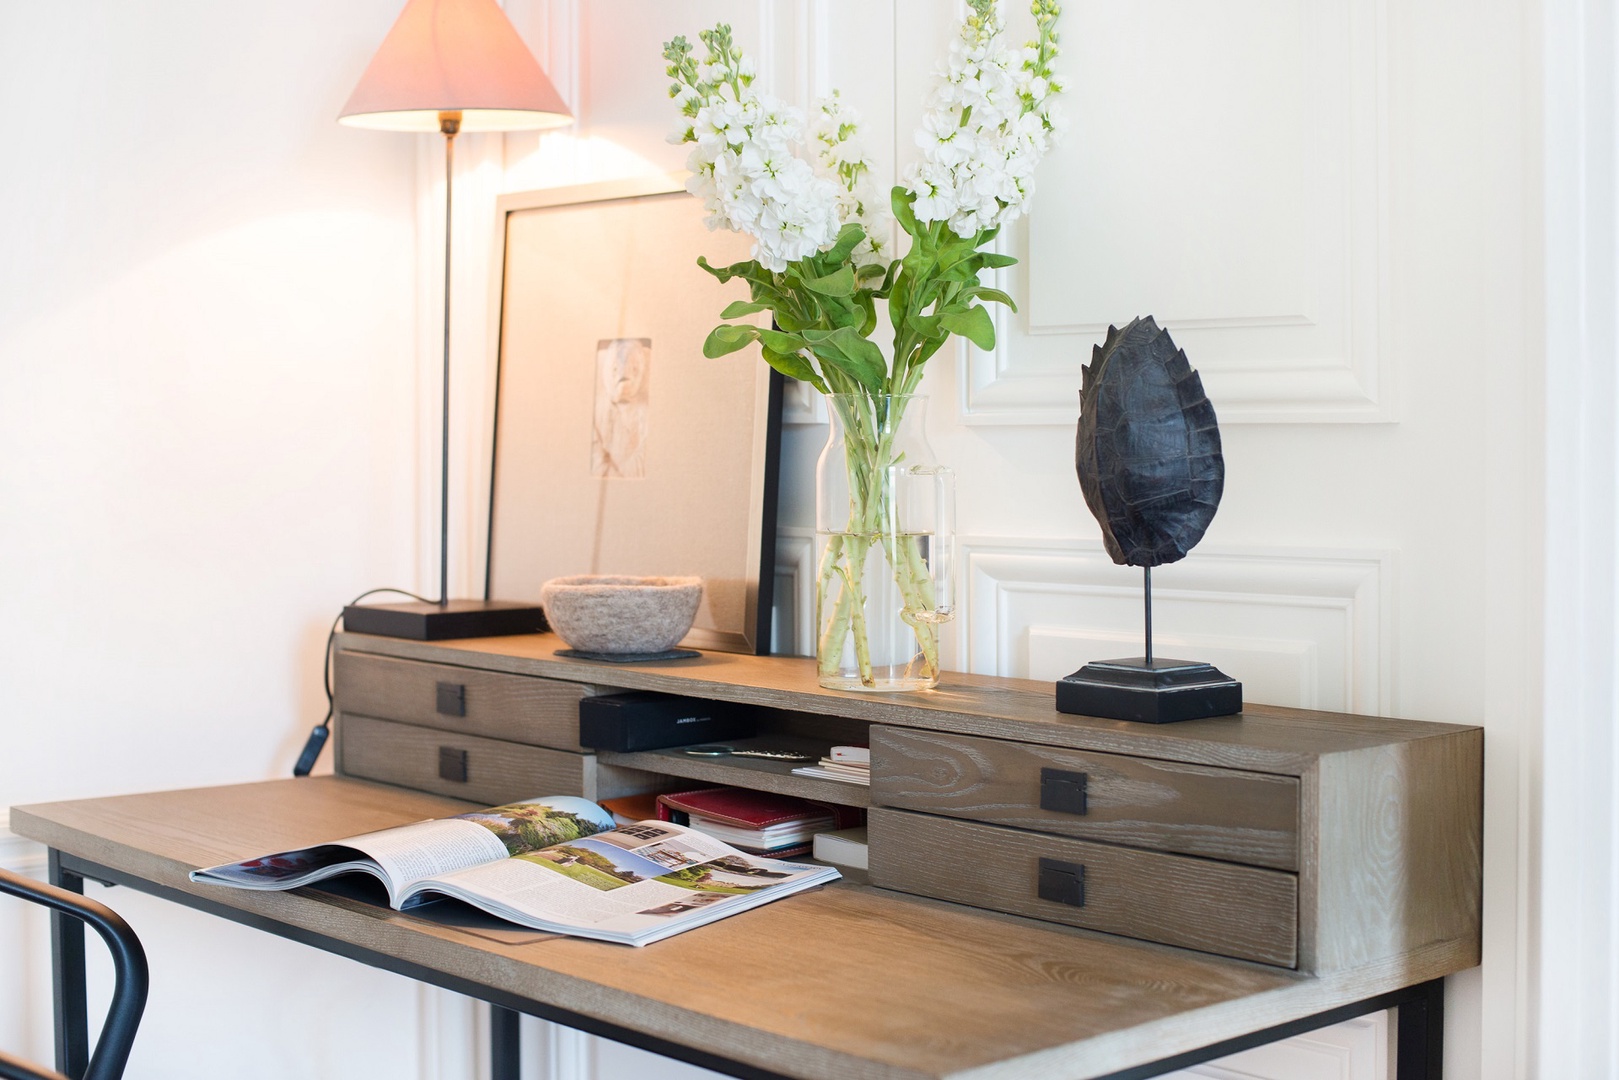 Browse French magazines in this charming desk alcove.